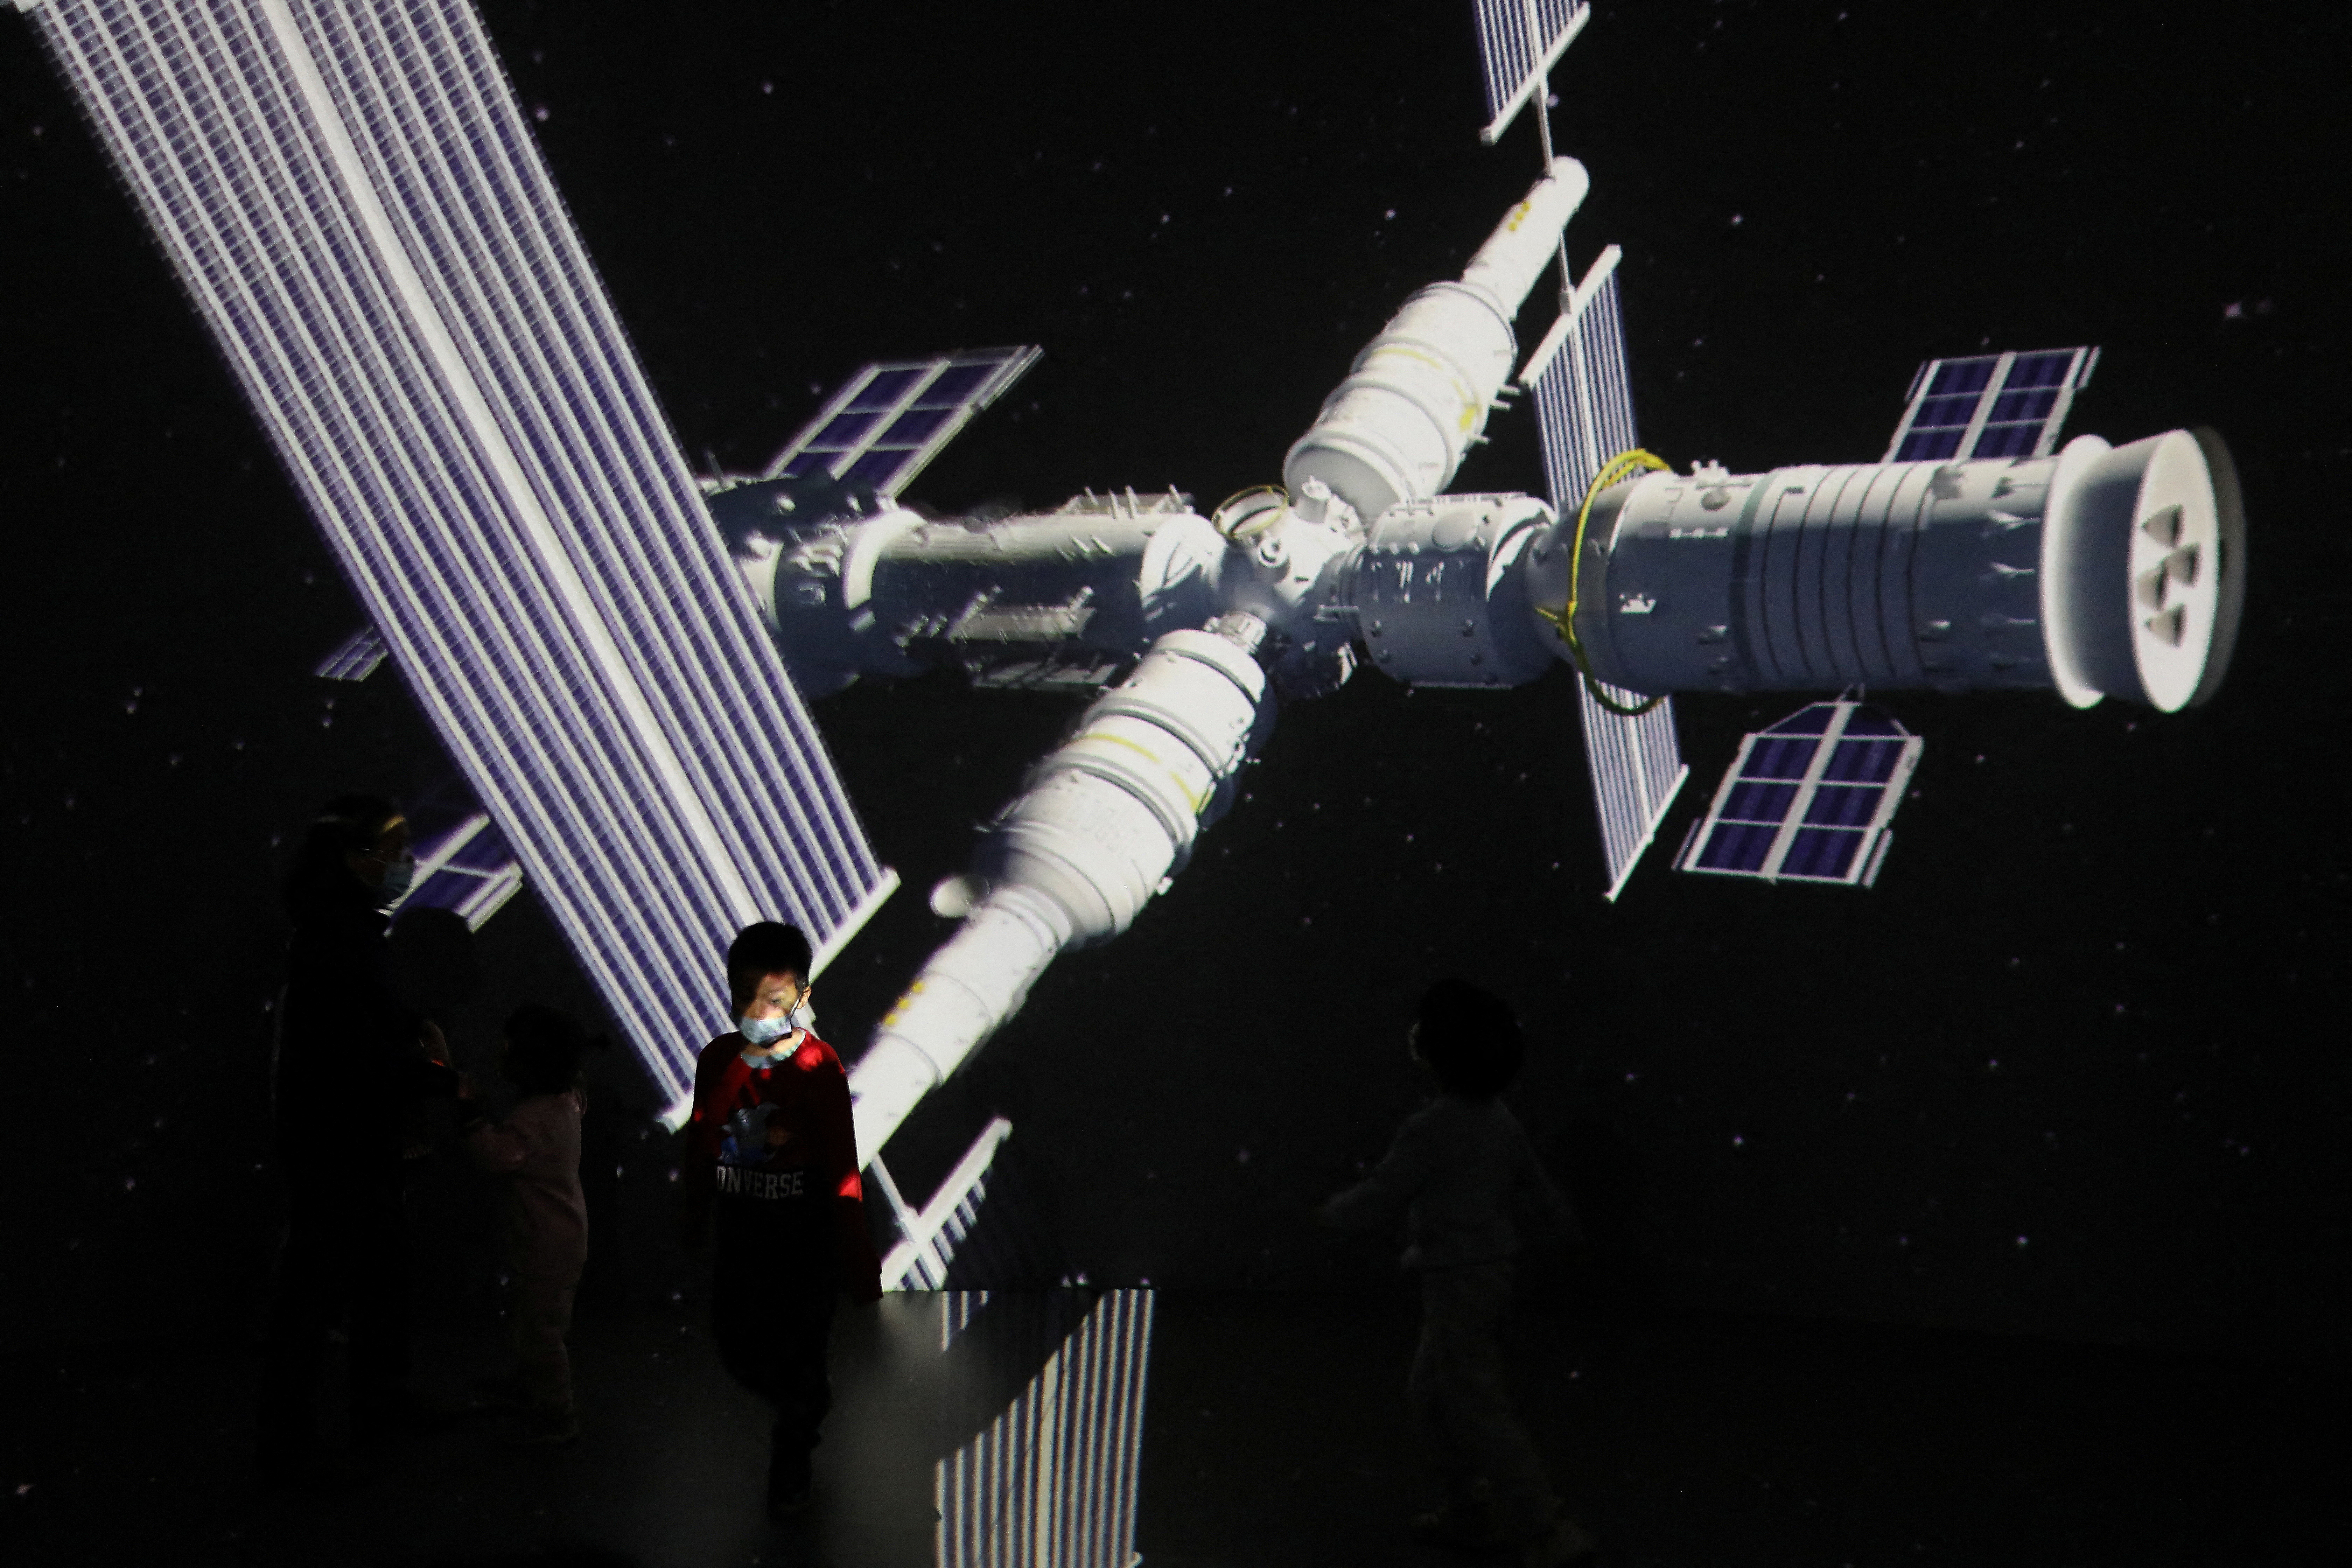 A child stands near a screen showing the image of the Tianhe space station